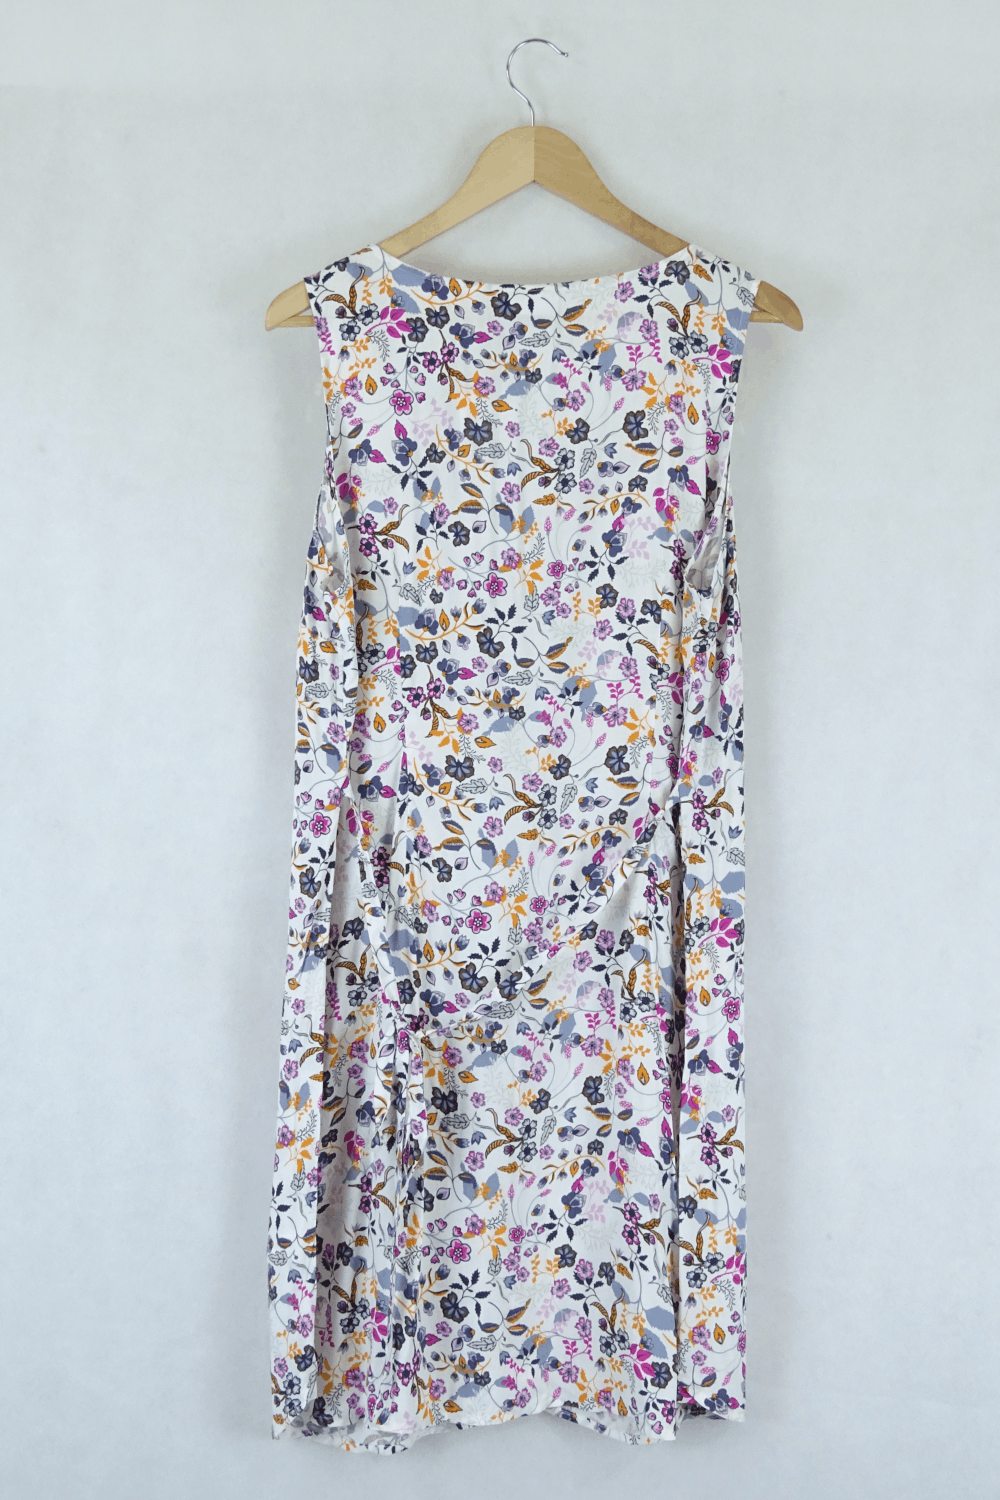 Jeanswest White Floral Dress 16